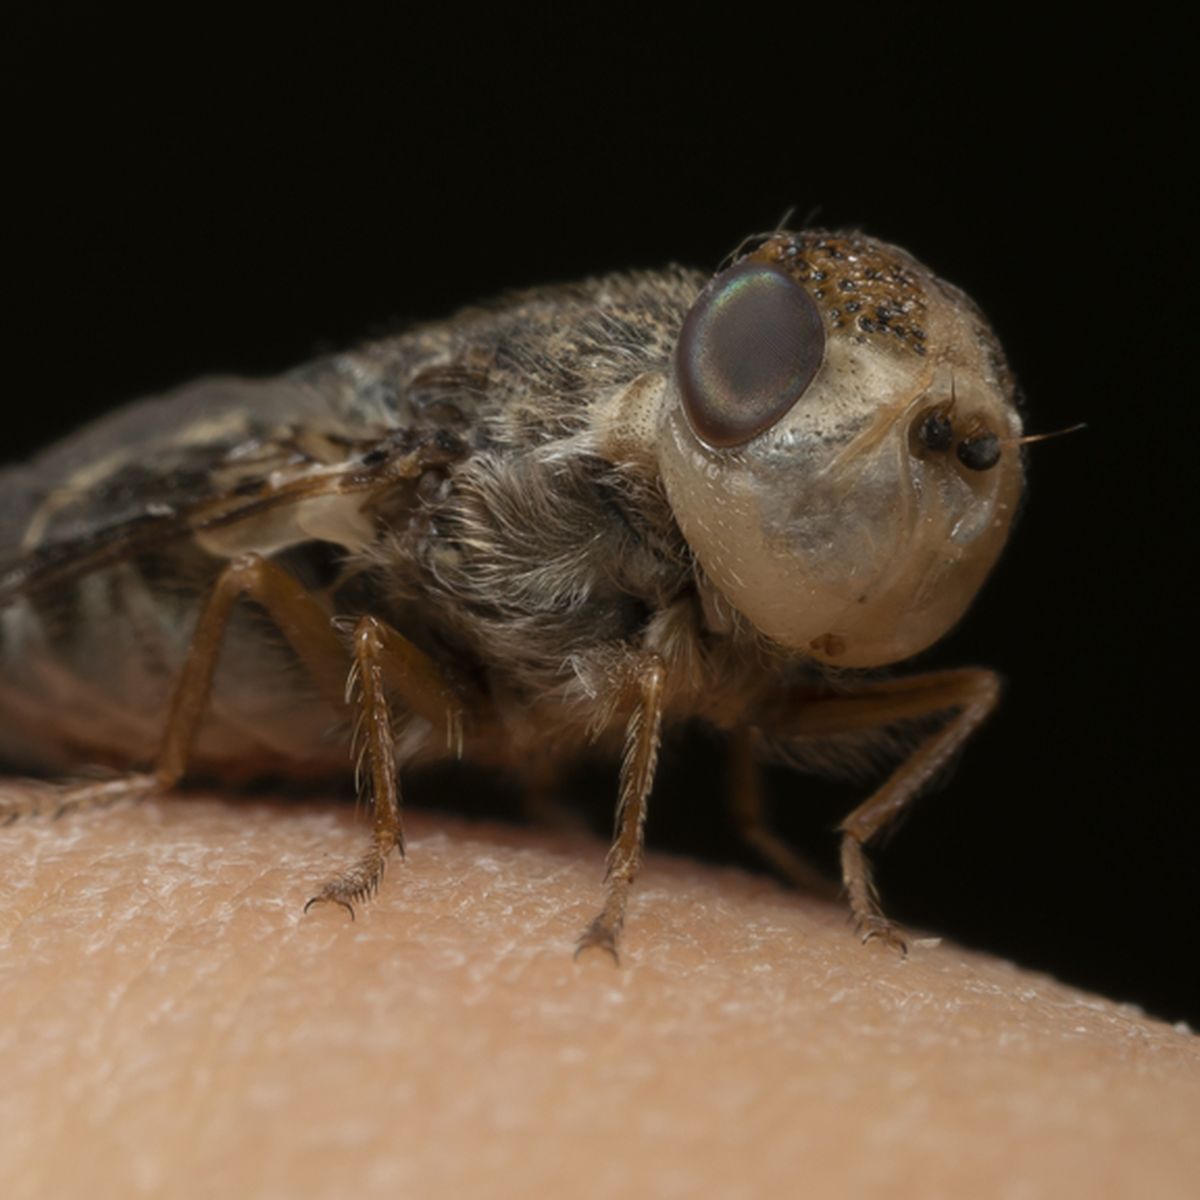 Man has fly larvae removed from eye after gardening encounter